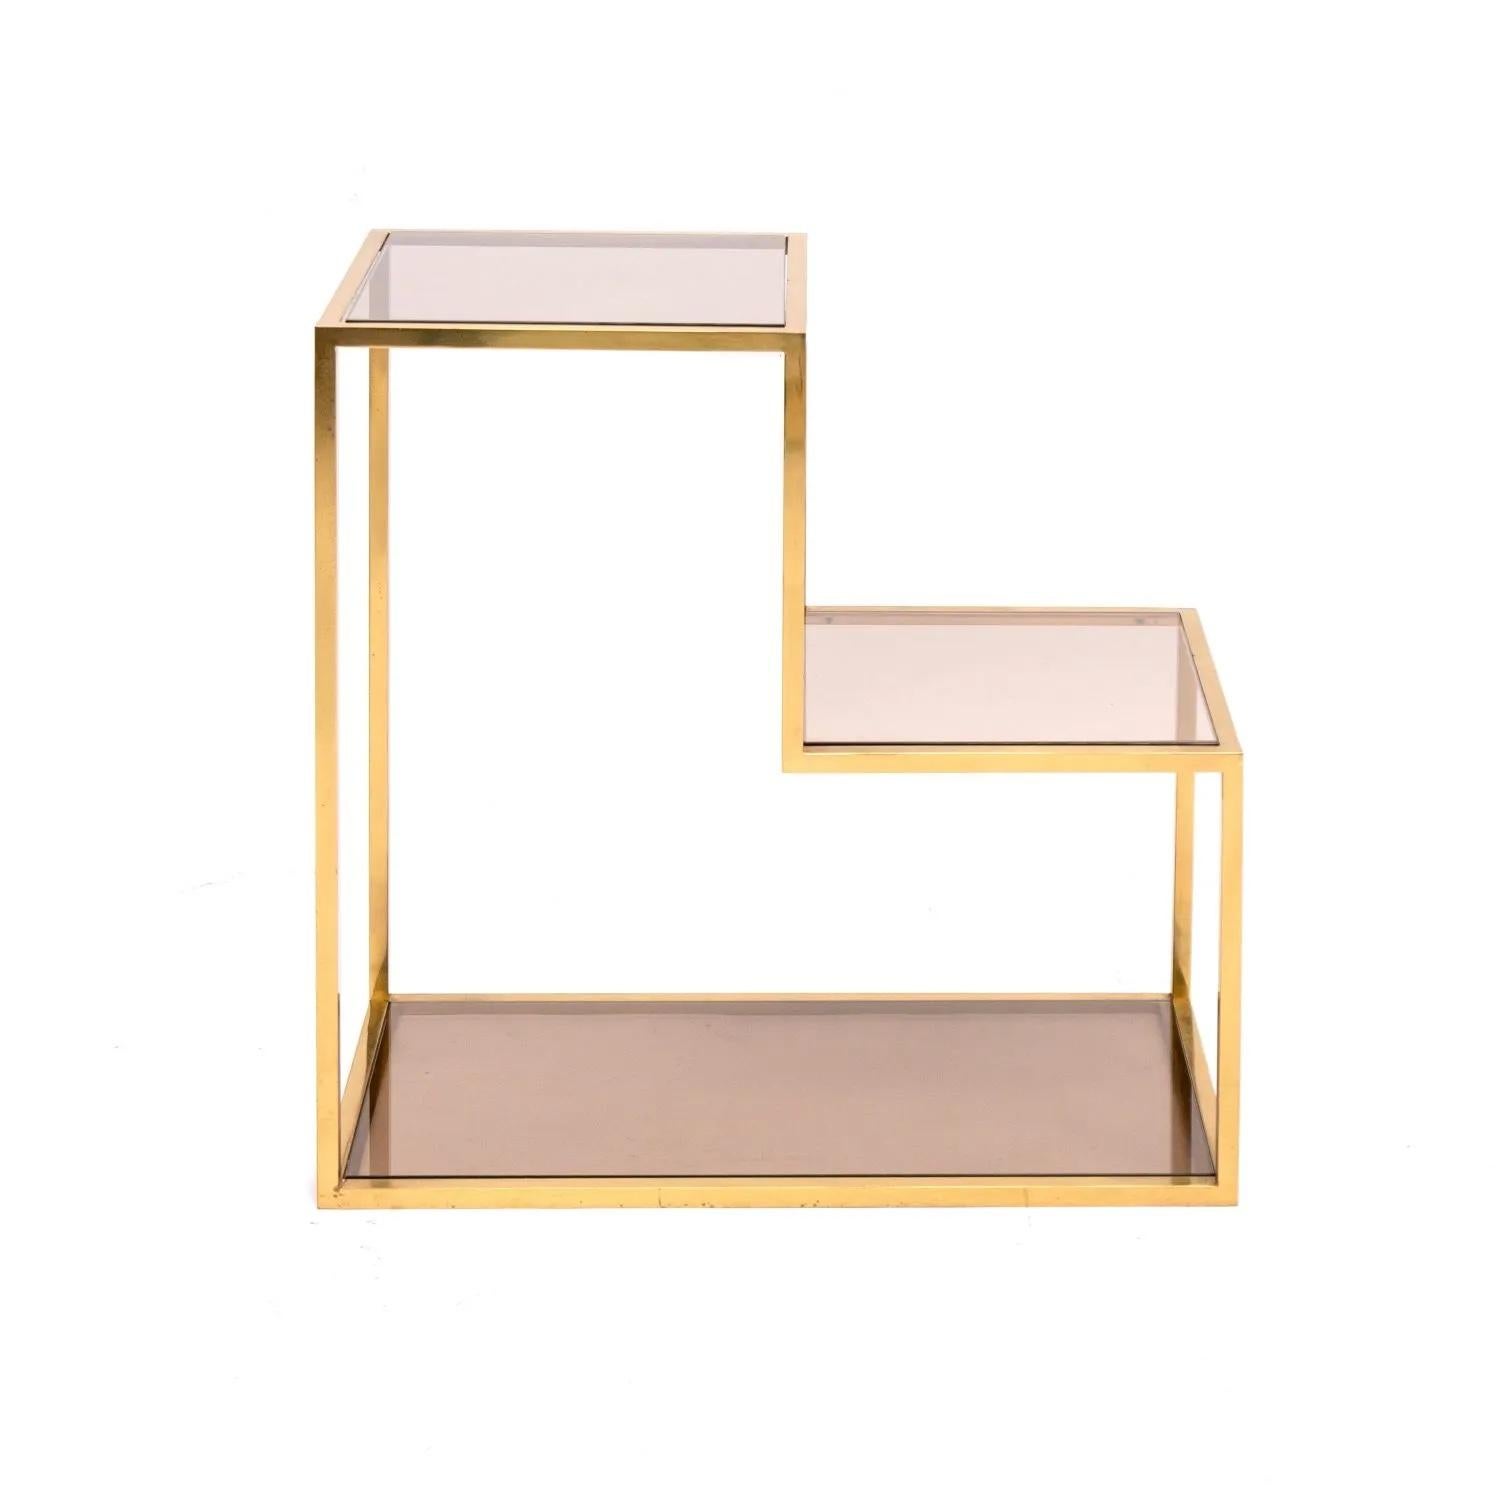 This vintage brass display cabinet features unique midcentury design, combining simple lines and an elegant way to store and display. In the style of the Italian designer Romeo Rega.